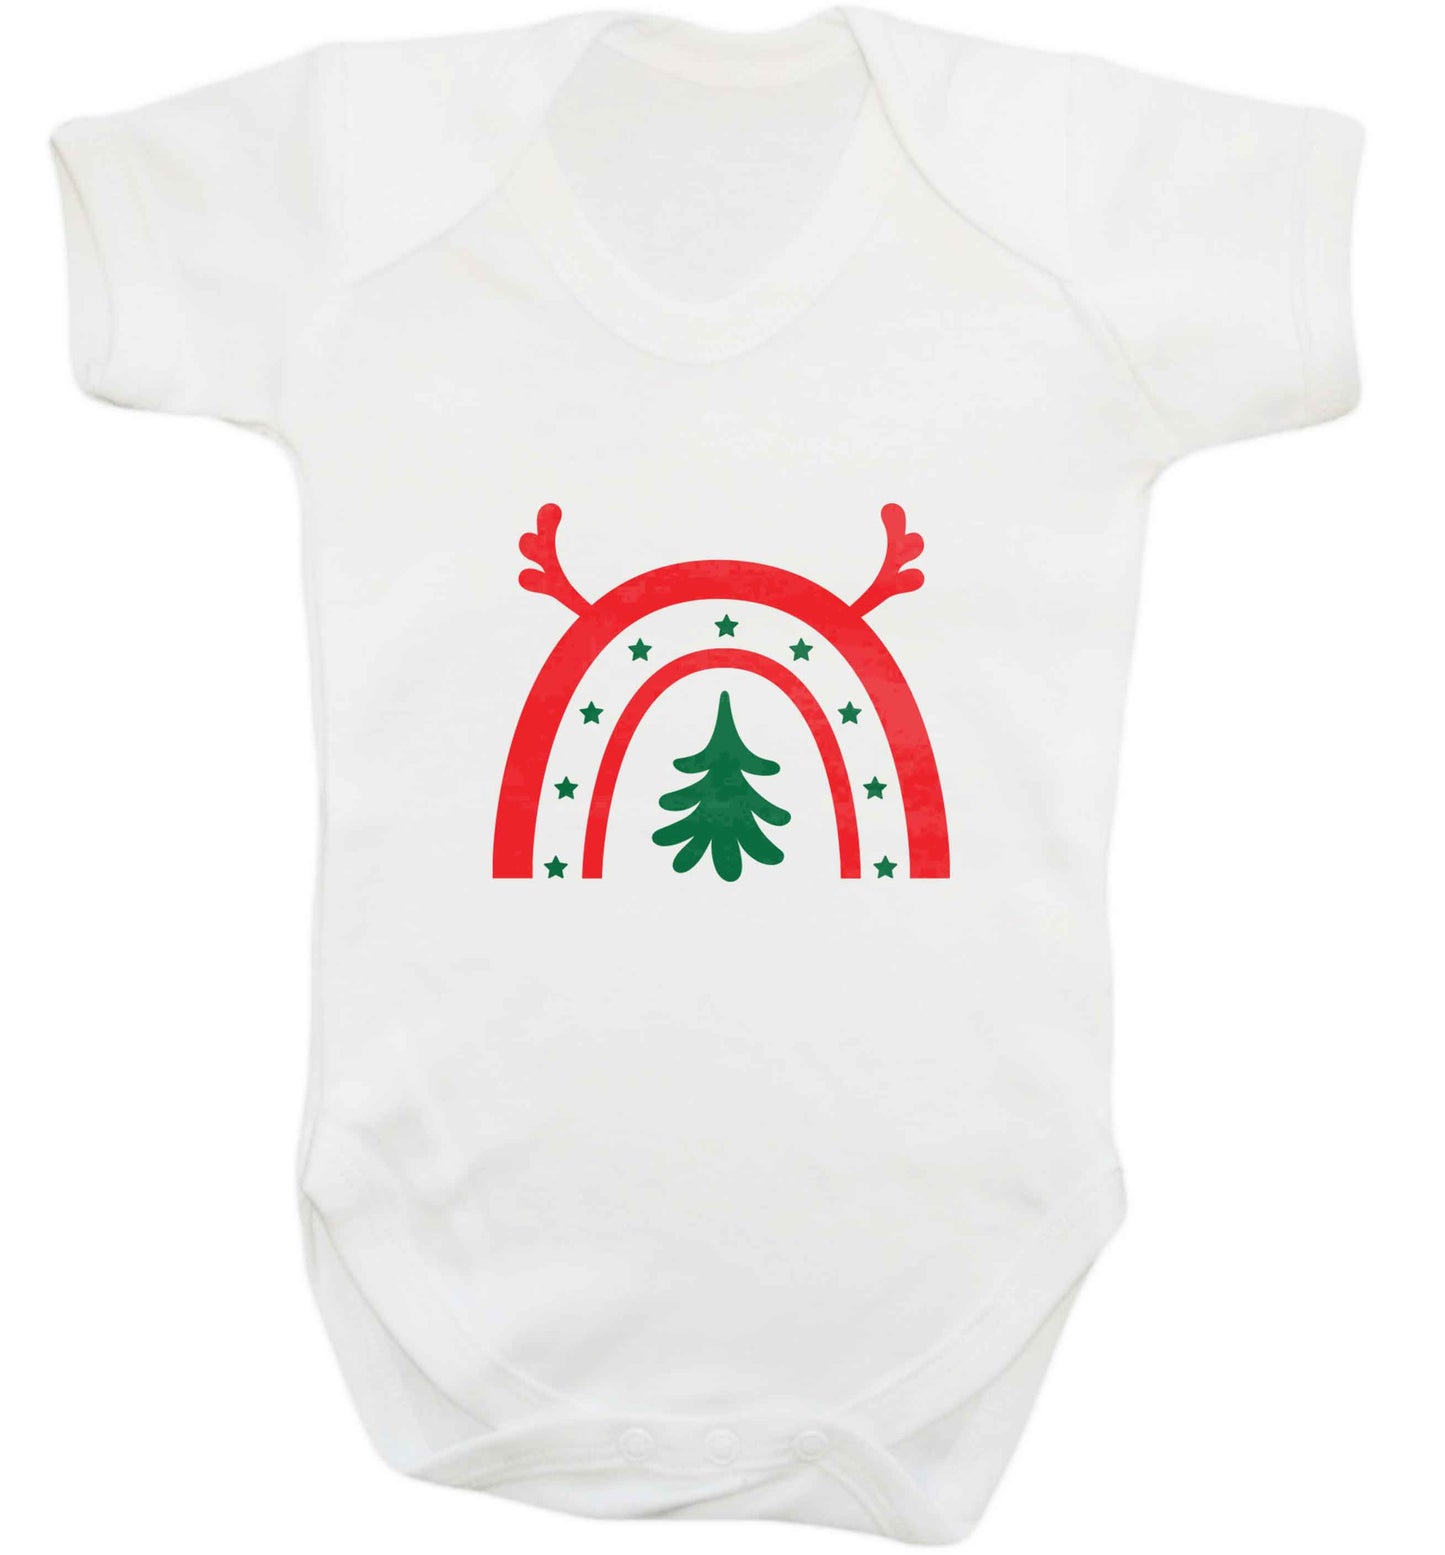 Christmas rainbow baby vest white 18-24 months